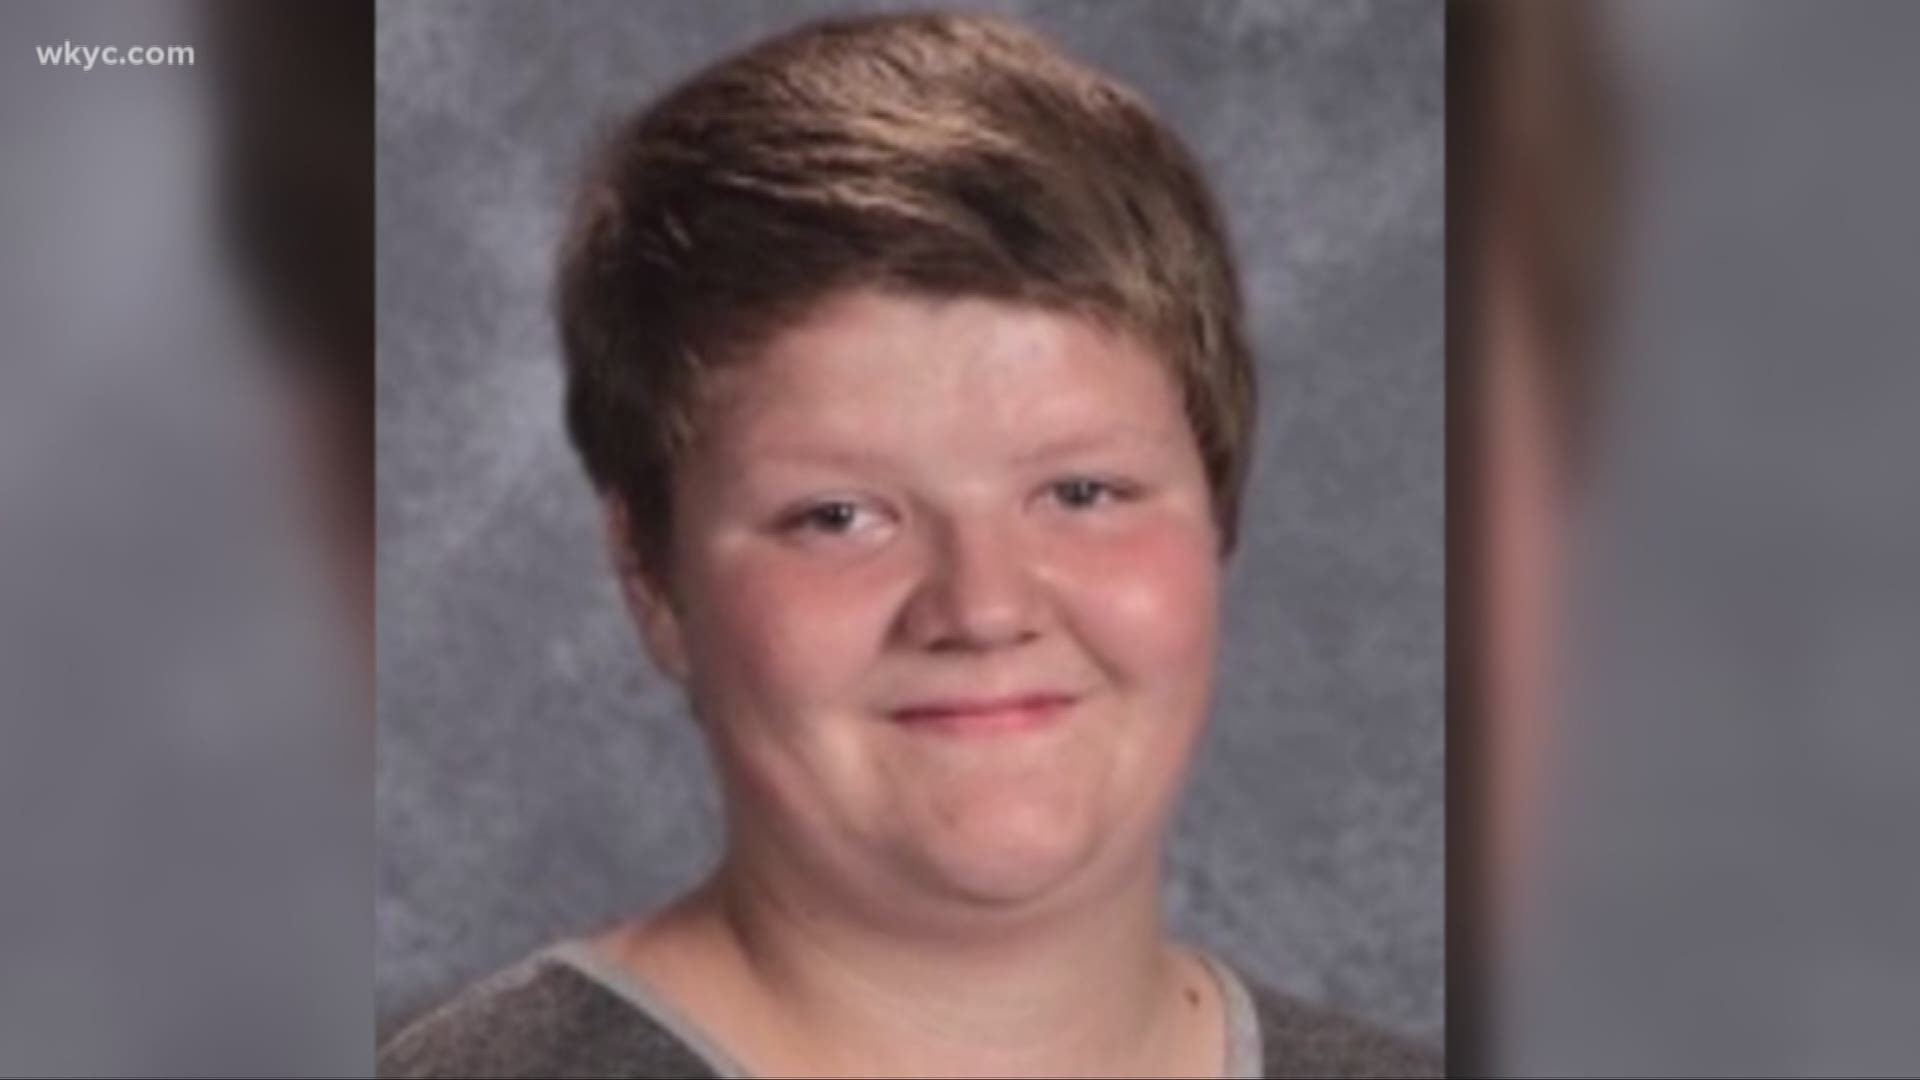 Search continues for missing Carroll County 14-year-old boy